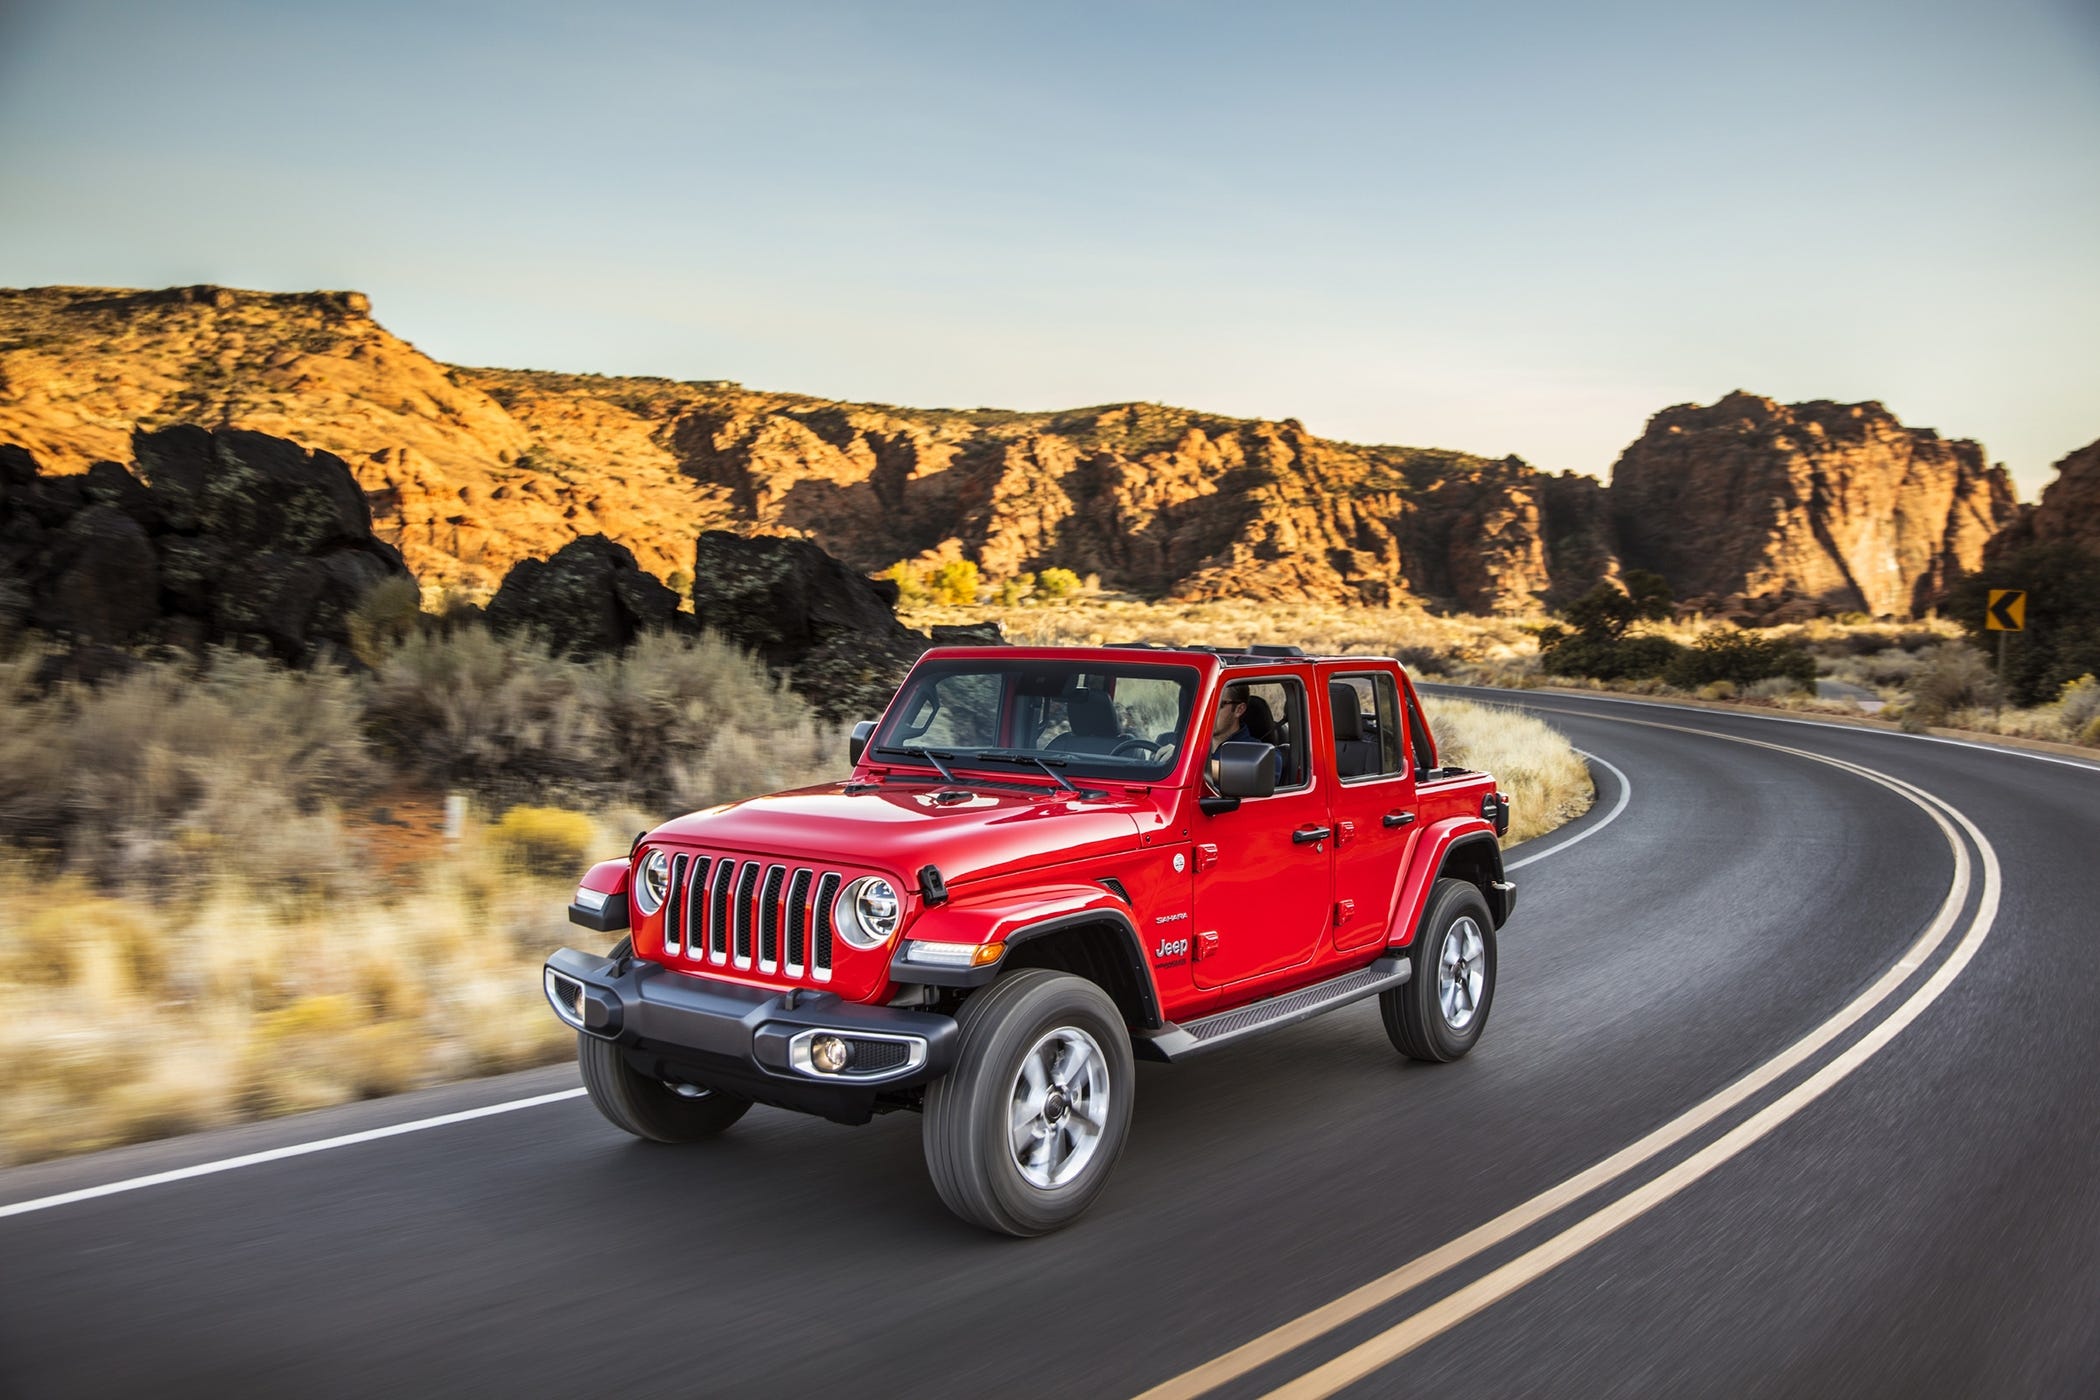 2020 Wrangler a diesel with spectacular off-road capability